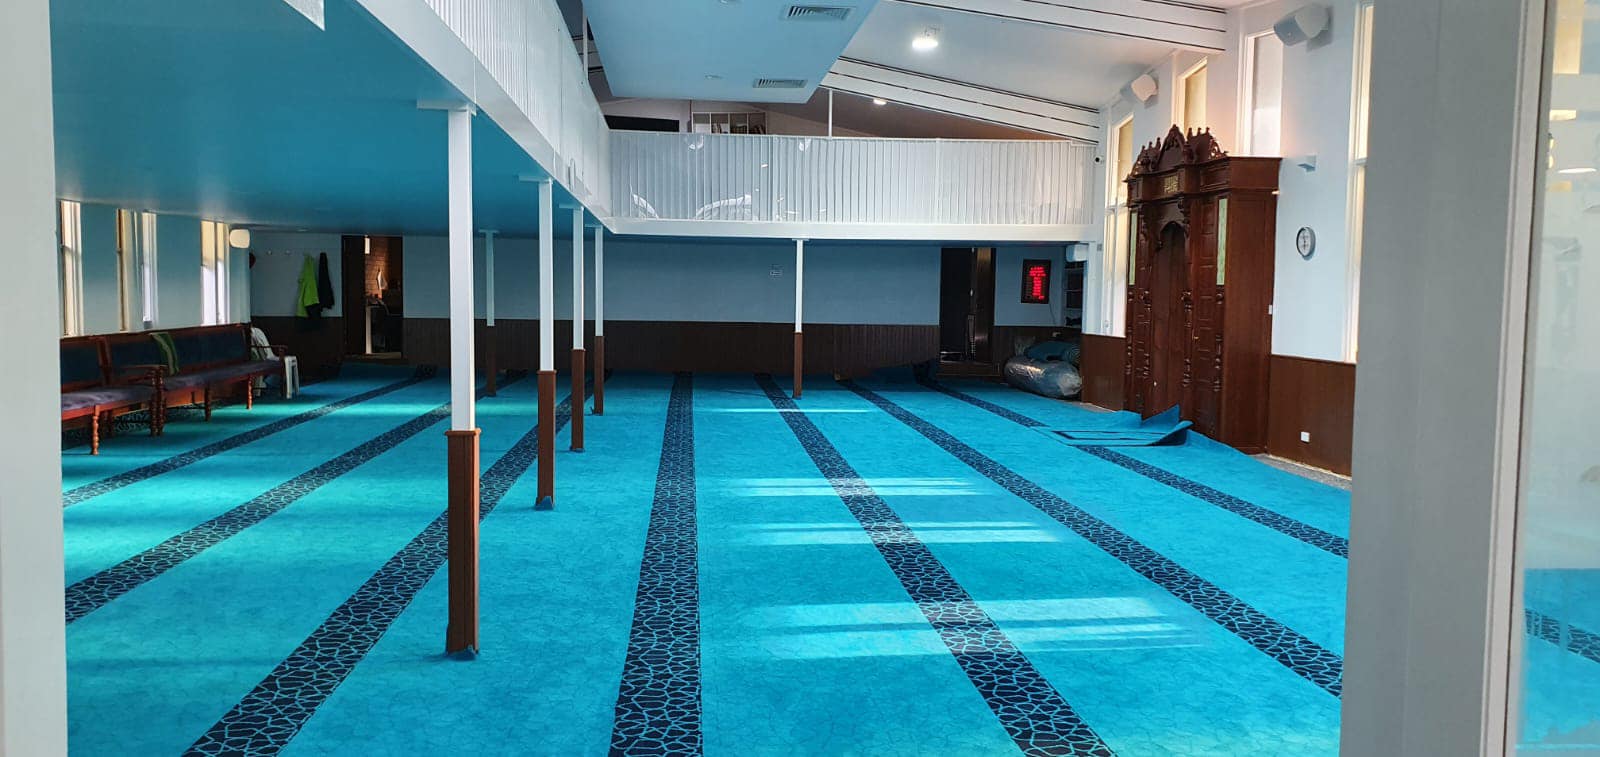 ICMG Guildford Mosque - Major Renovation